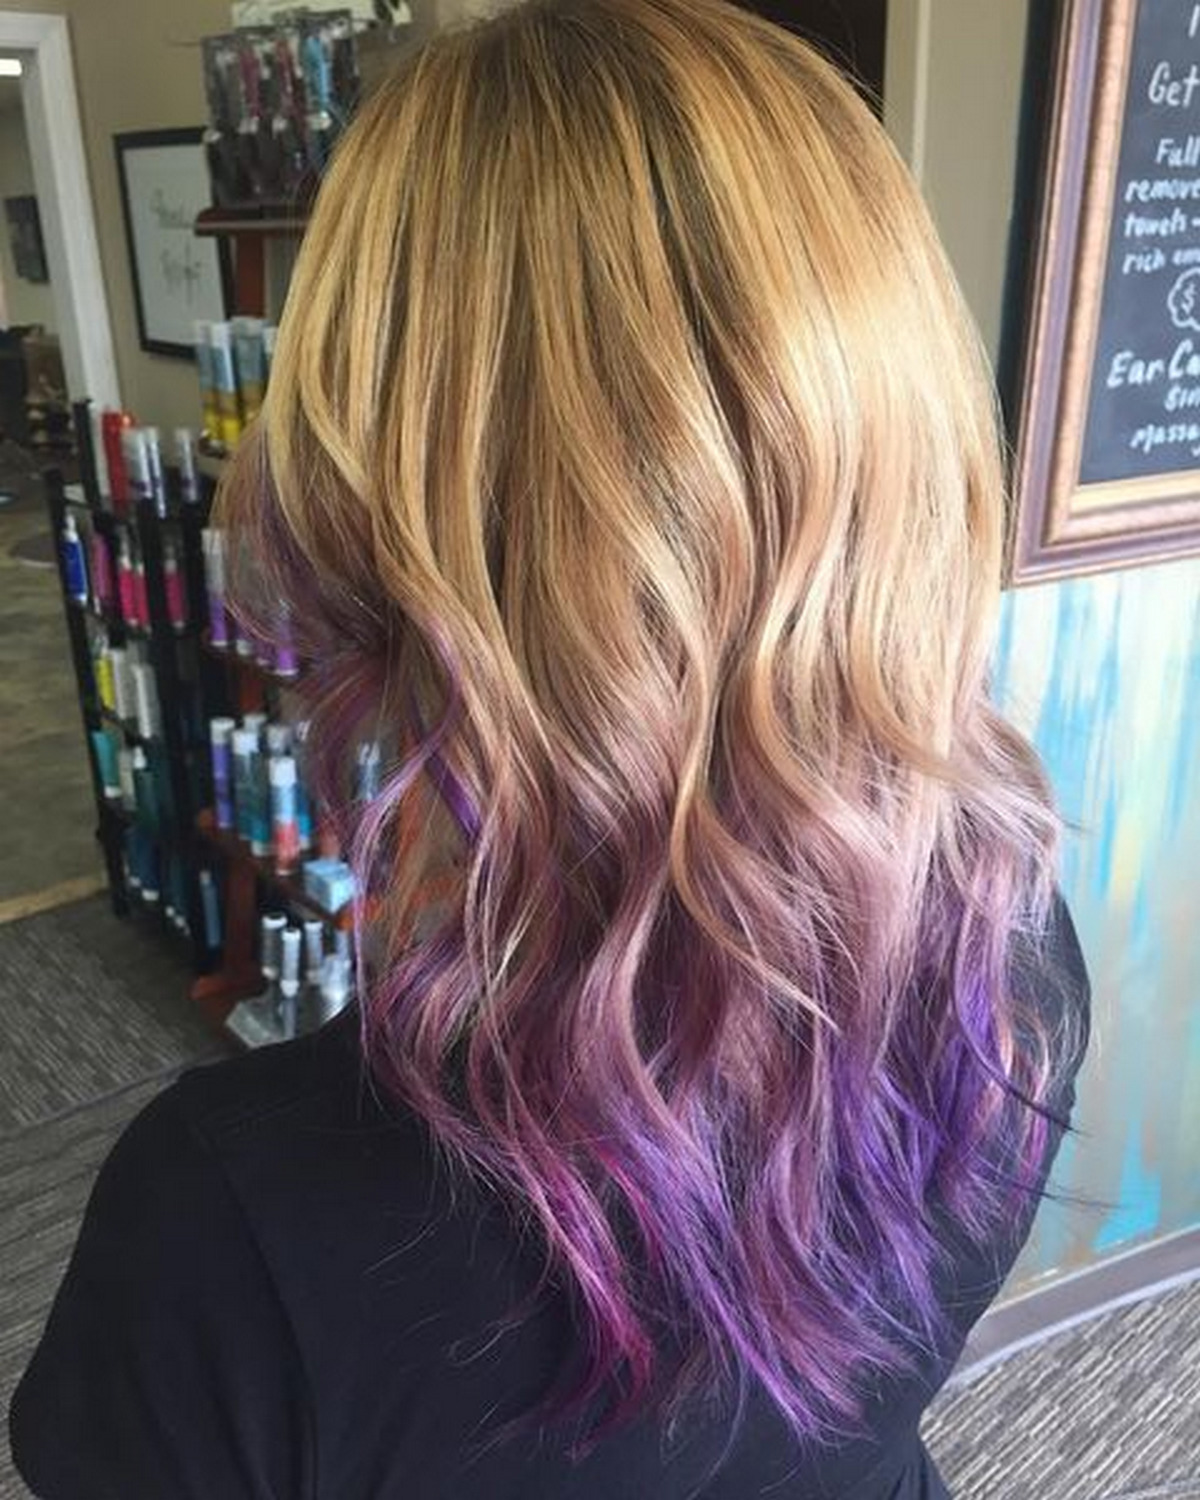 Layered Cut with Purple Ombre-ed Ends